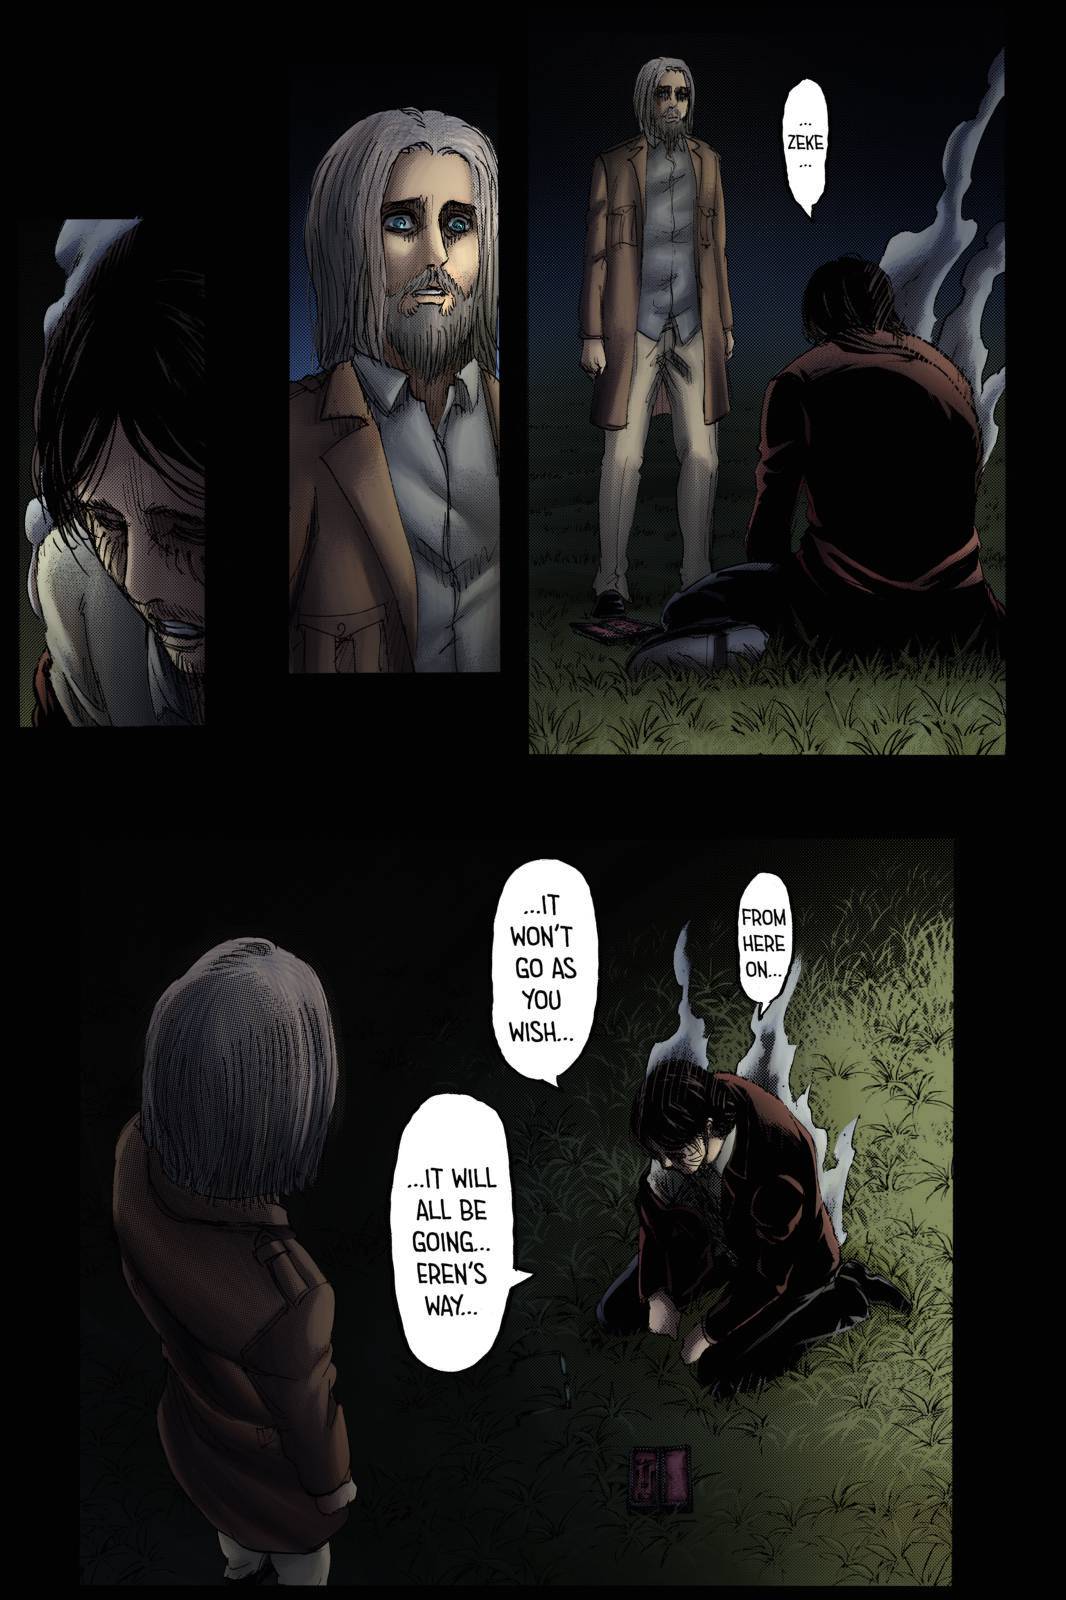 What did Eren Yeager tell Grisha Yeager with his Titan ability to